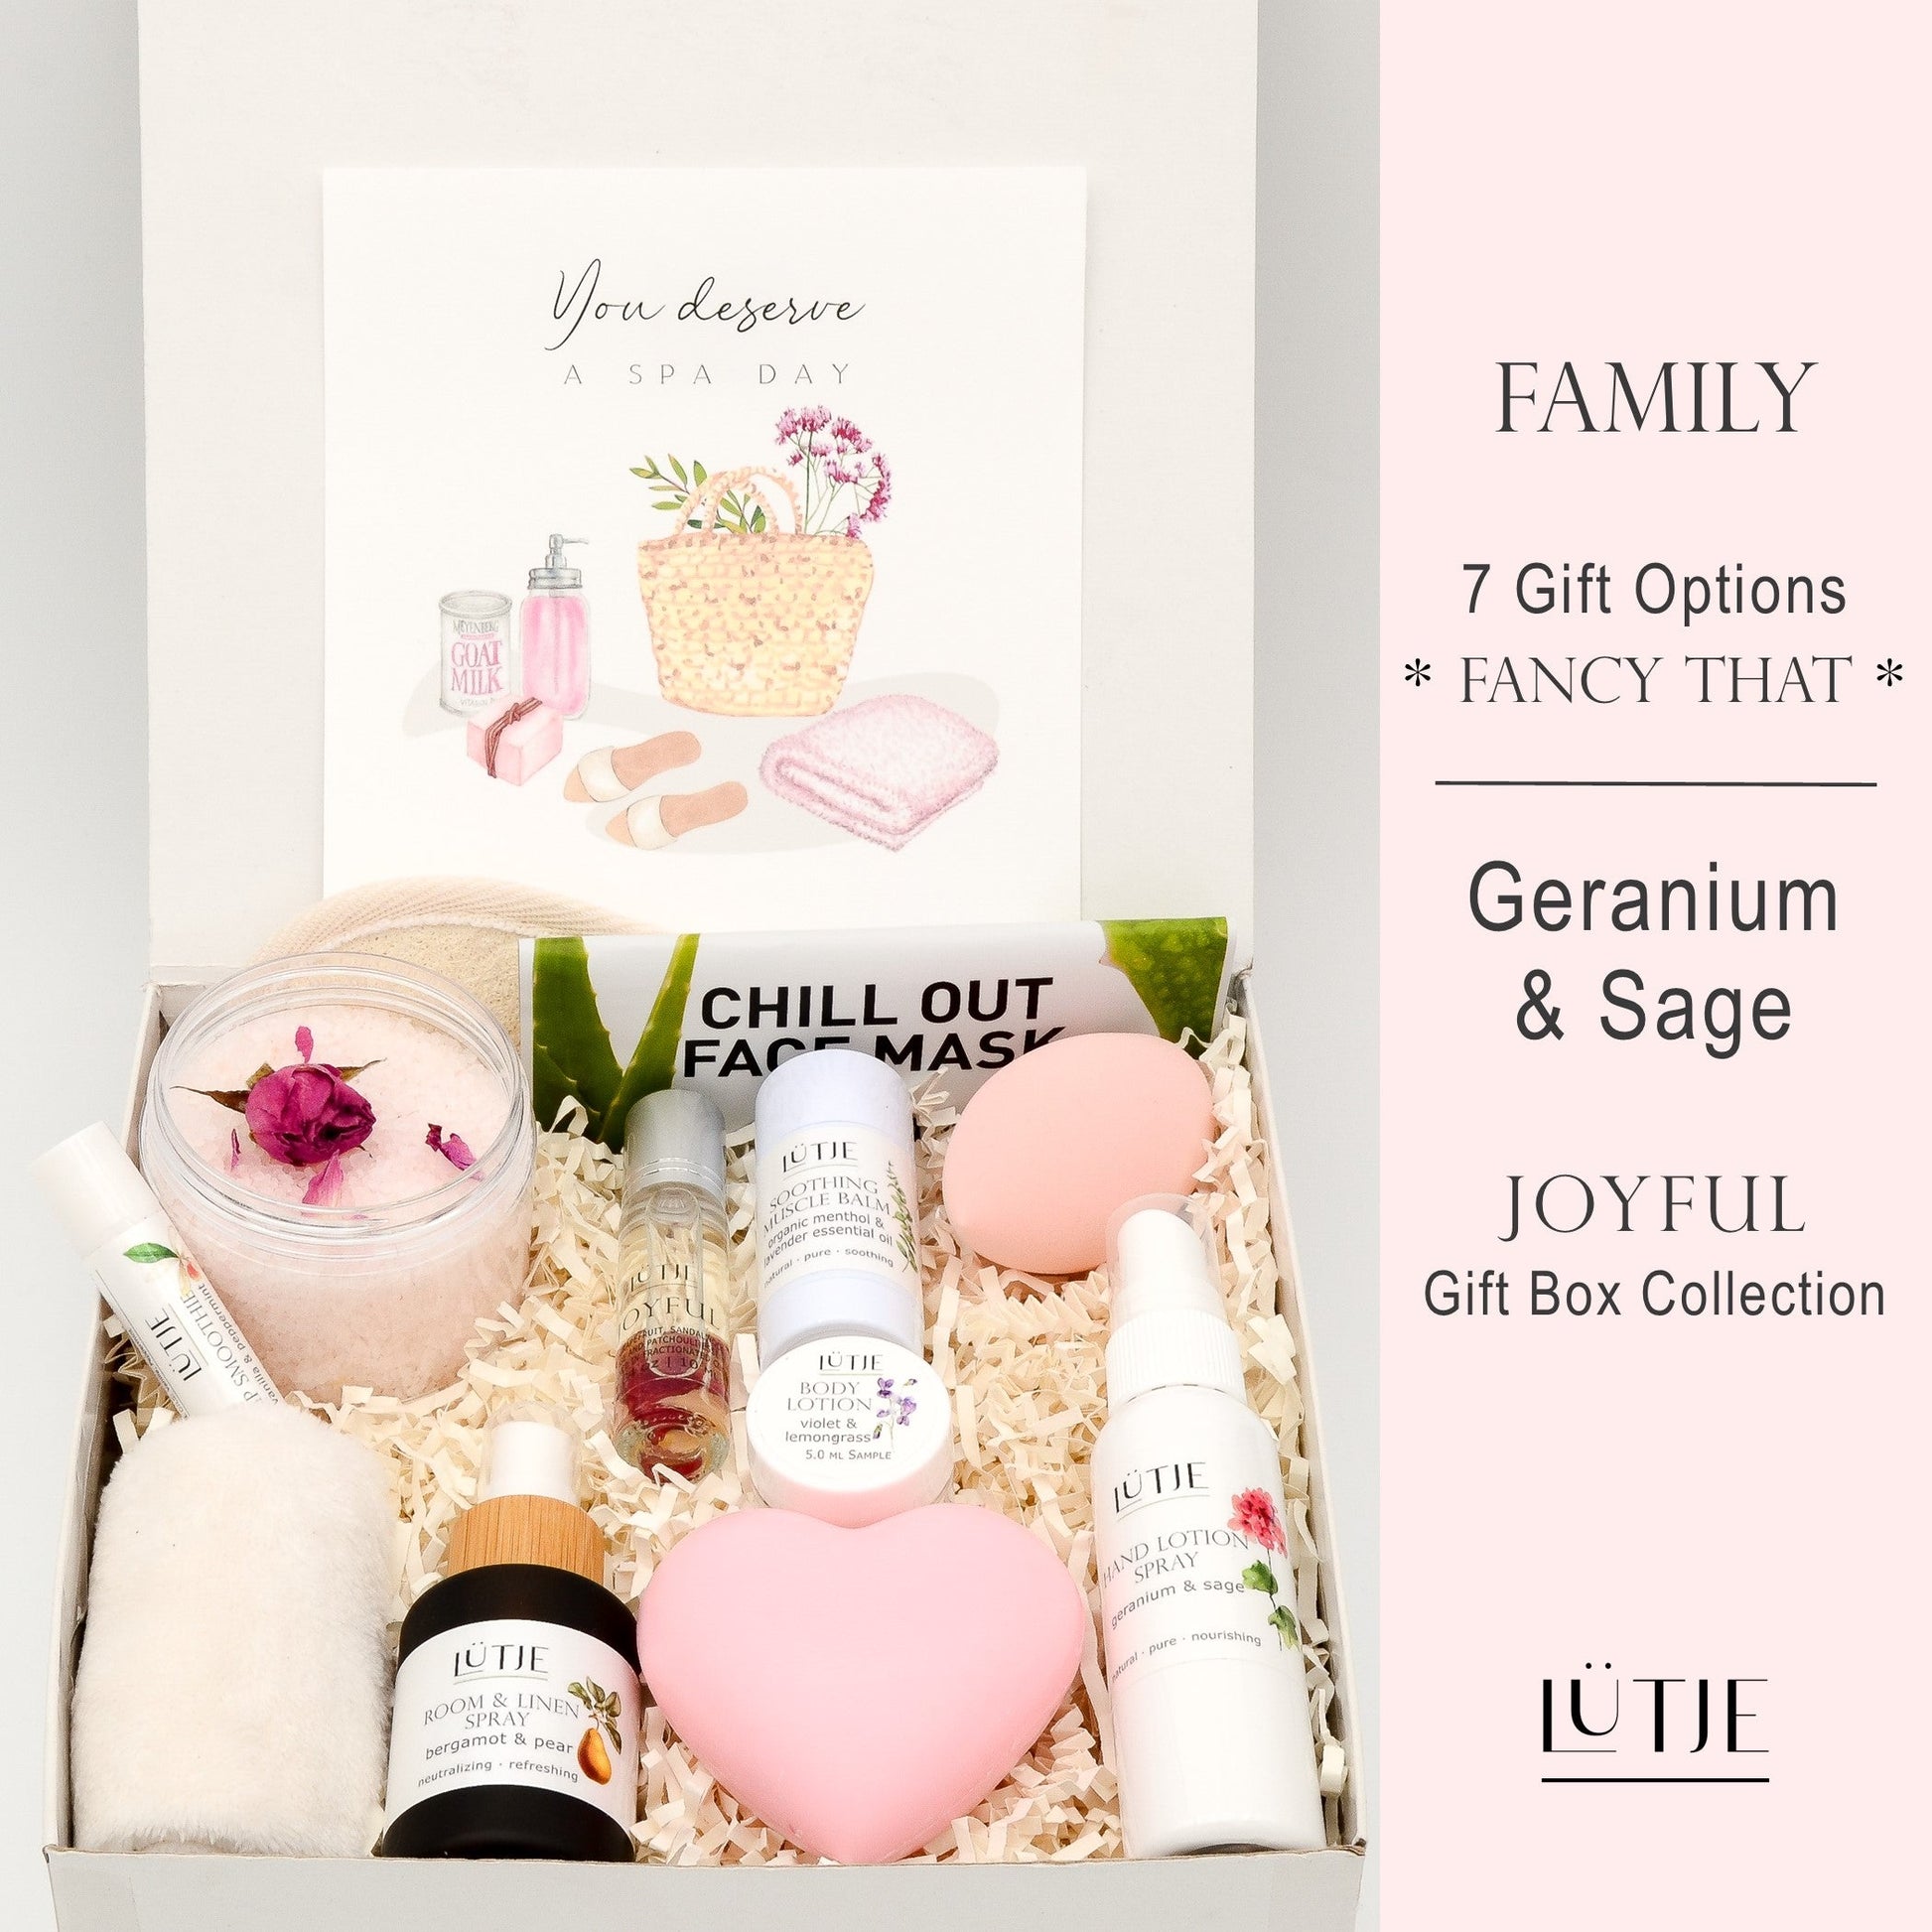 Gift Box for women, wife, daughter, BFF, sister, mom, or grandma, includes Geranium & Sage hand lotion spray and body lotion, essential oil, lip balm, soothing muscle balm, Bergamot & Pear room & linen spray, French soap, French bath salts, hydrating face mask, other bath, spa and self-care items, and 18K gold-plated necklace with engraved heart.